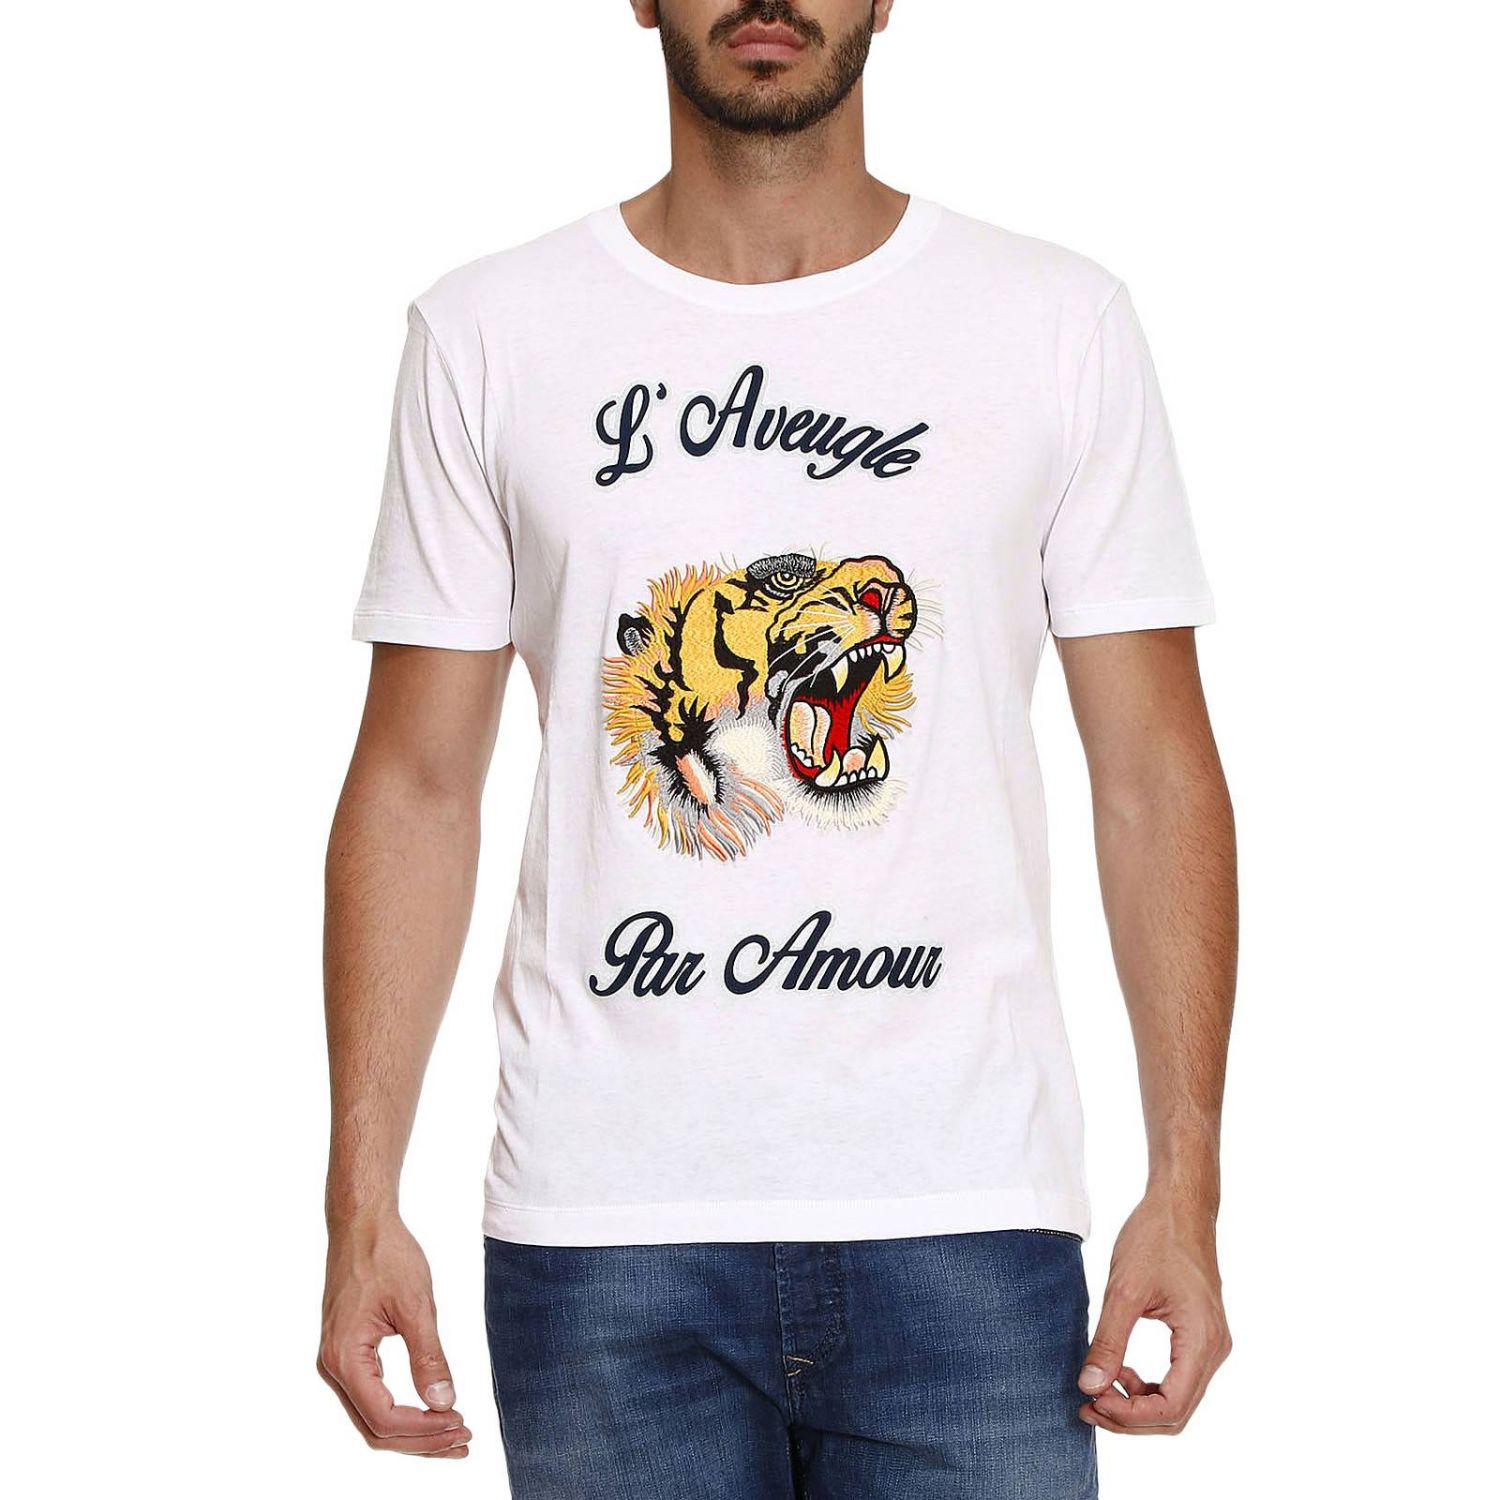 gucci t shirt with writing